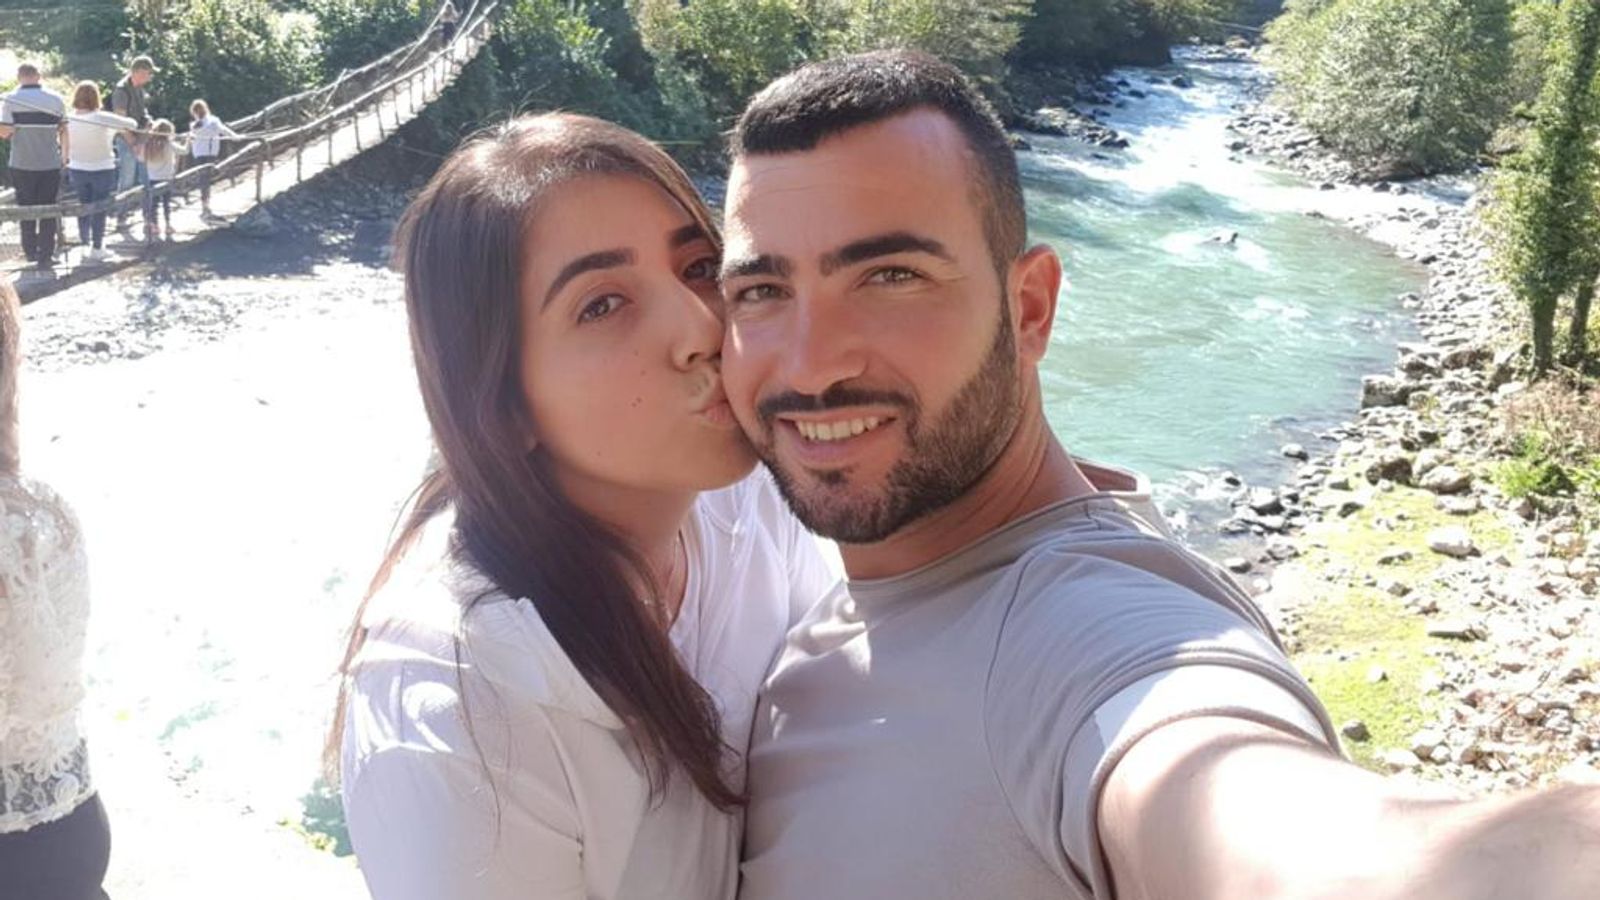 'Tell me you're alive': Couple's desperate last messages to each other before Hamas massacre